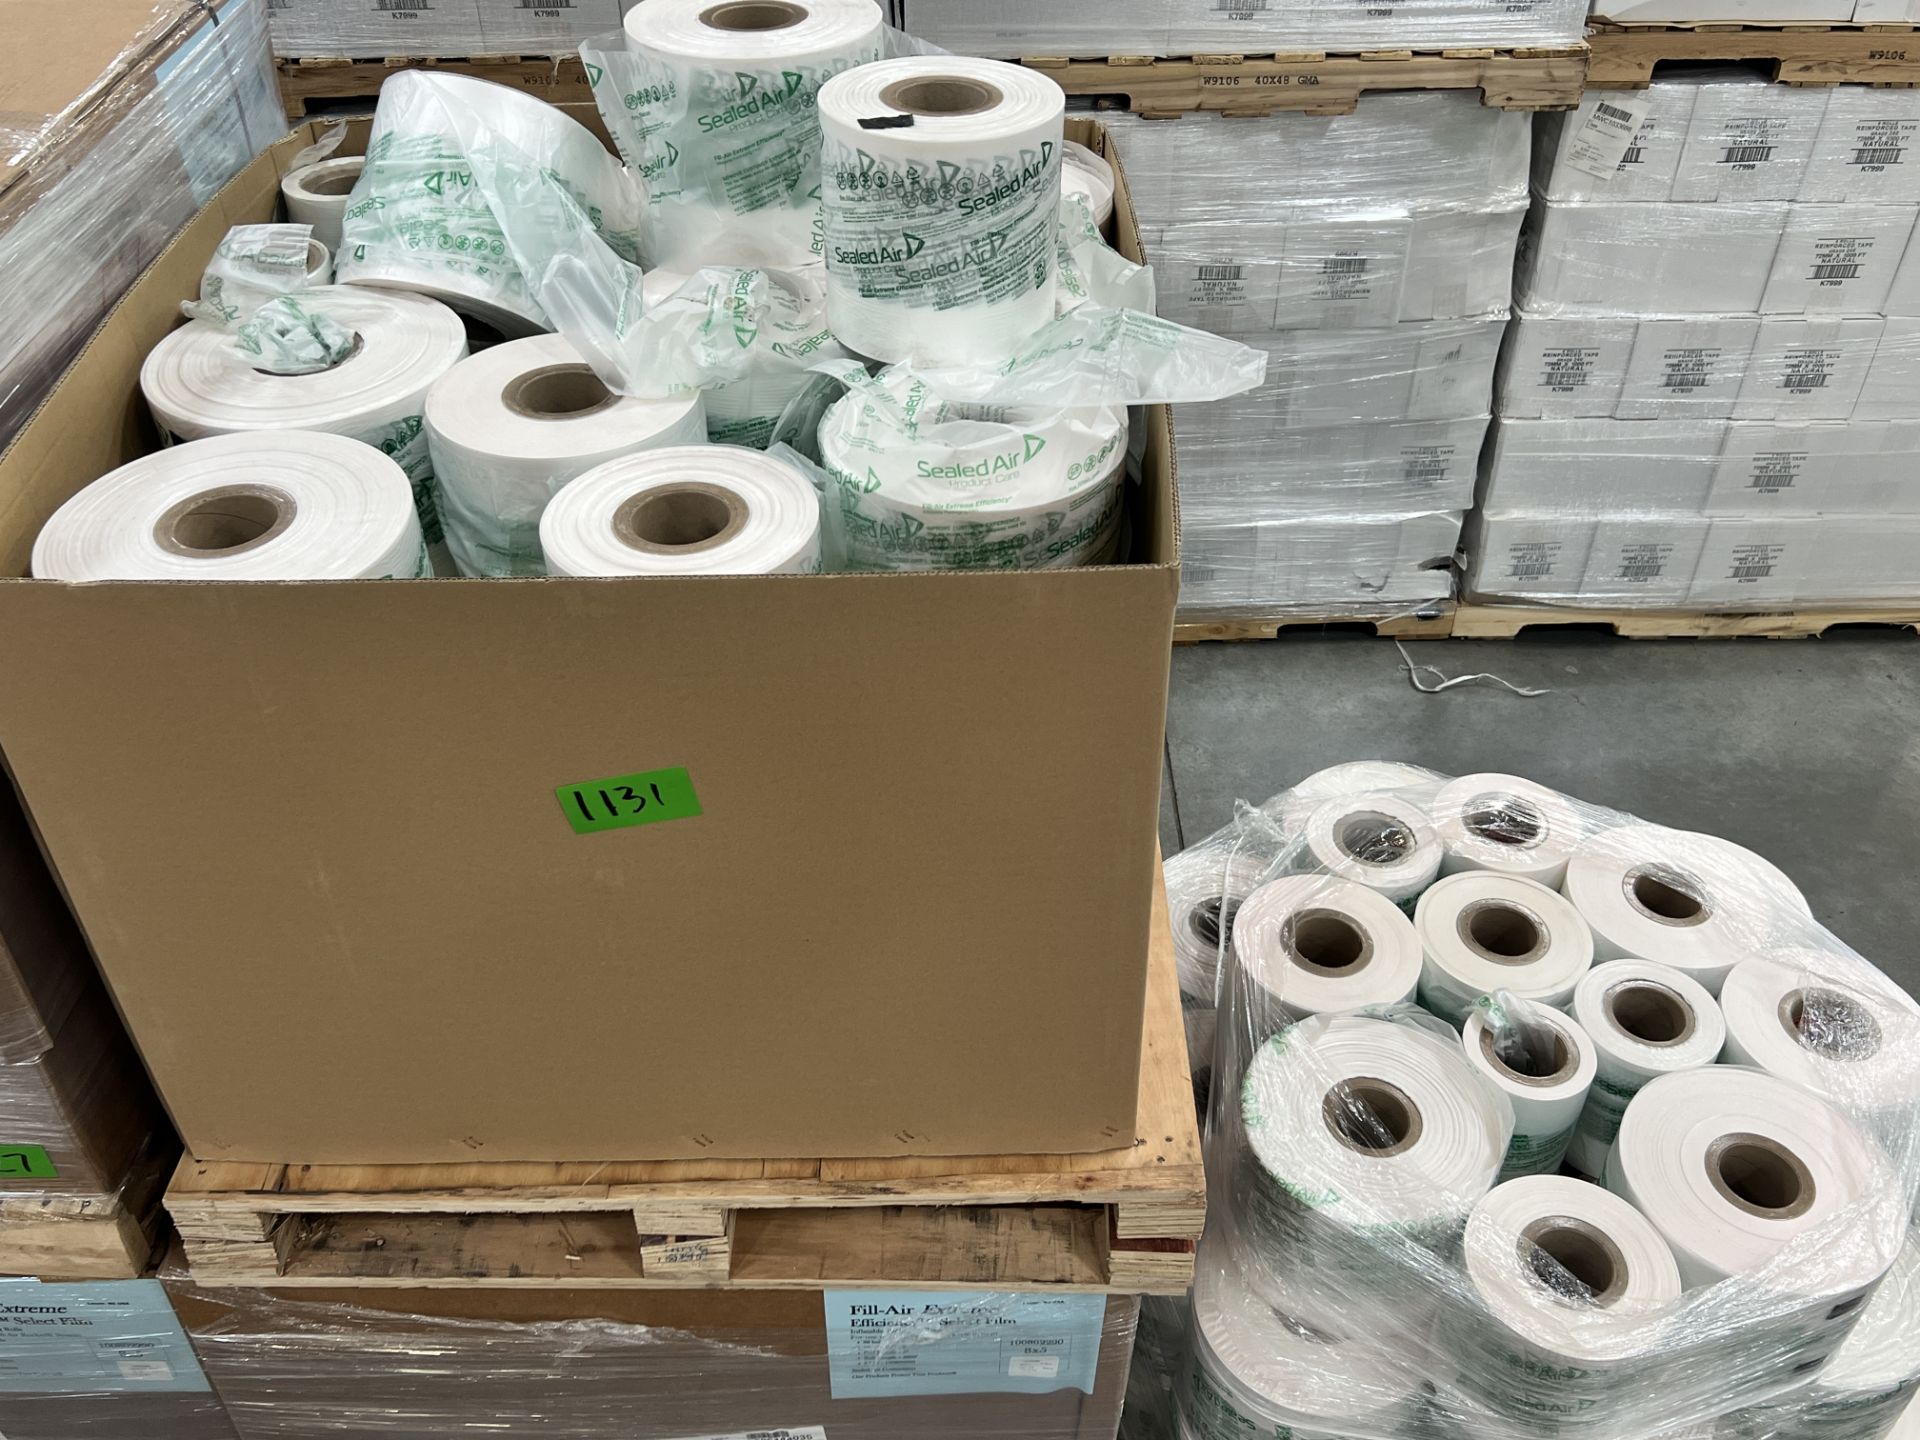 Sealed Air 8" x 5" Rolls - Image 3 of 6